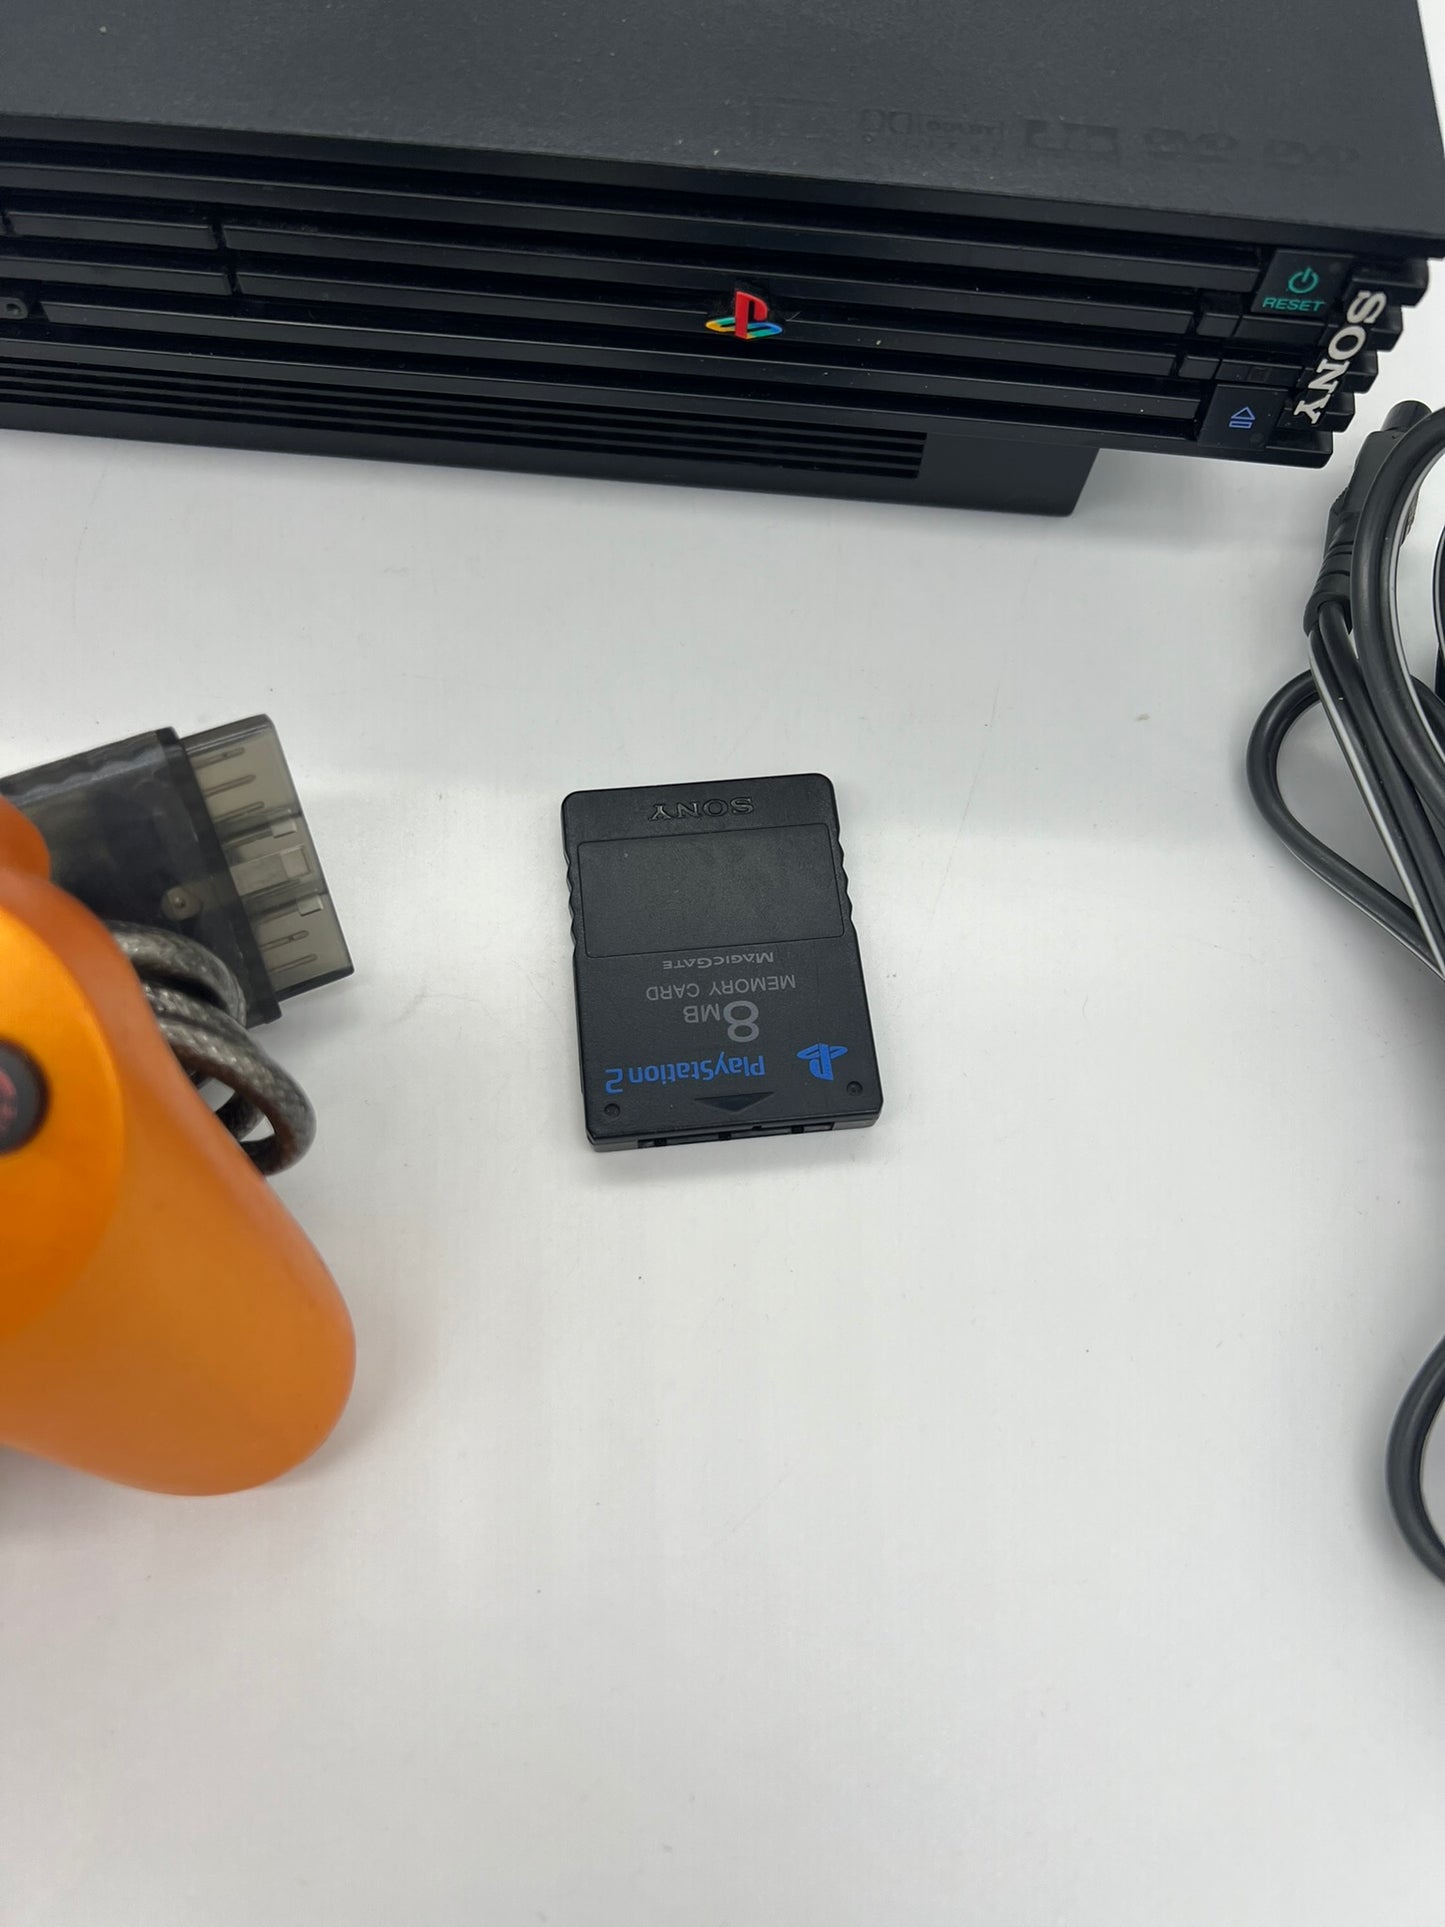 Sony PlayStation 2 Phat With Network Adaptor Tested And Working